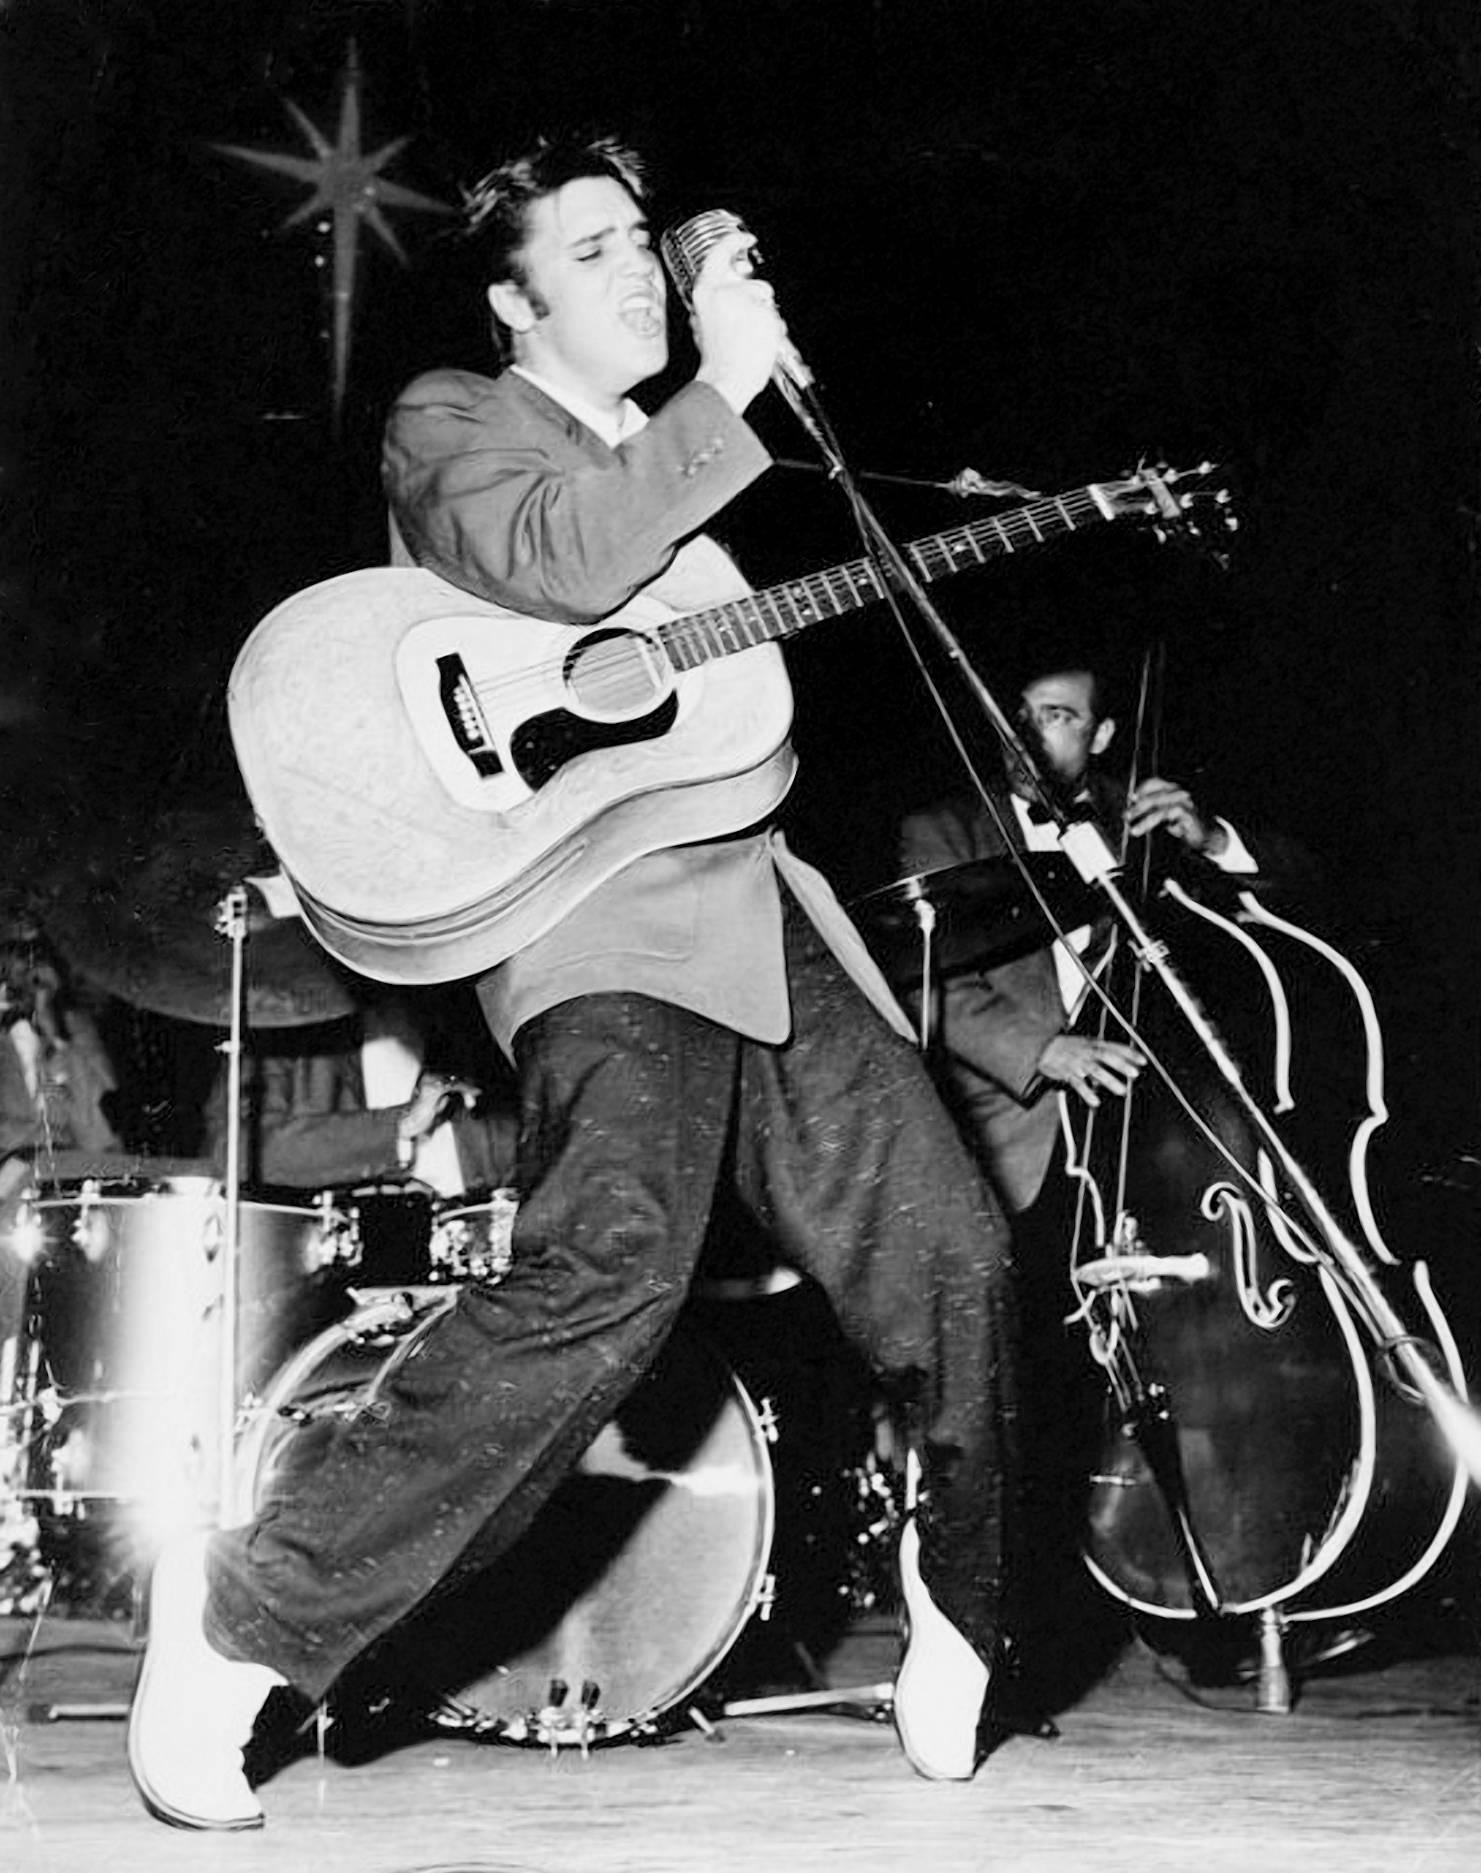 Charles Trainor Black and White Photograph - Elis Presley, The King of Rock N' Roll Performing Fine Art Print